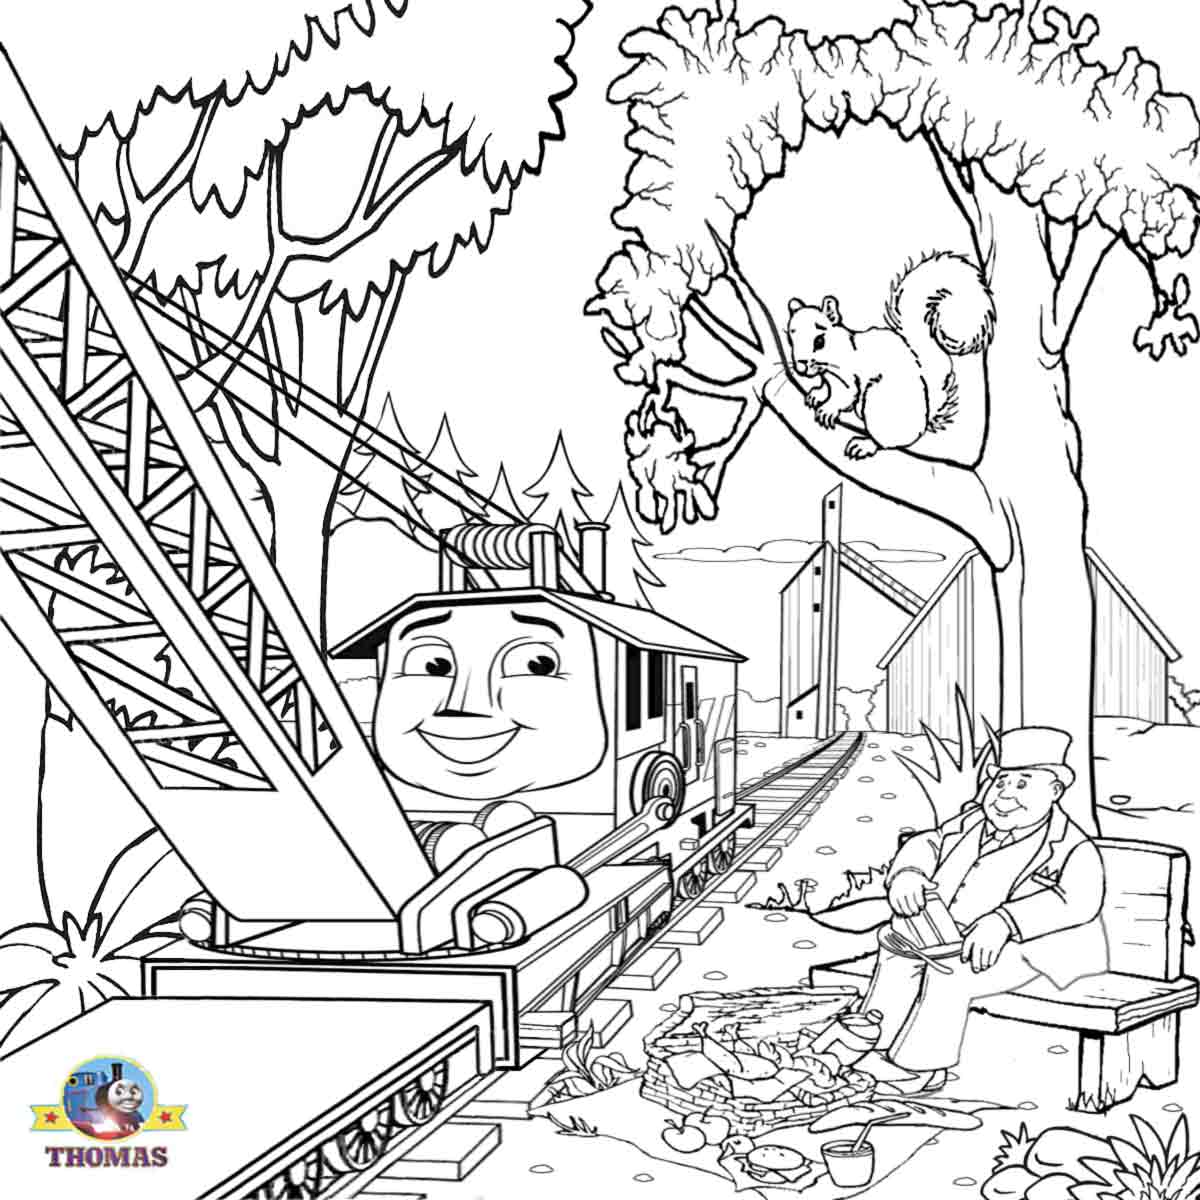 free-coloring-pages-printable-pictures-to-color-kids-drawing-ideas-thomas-tank-the-train